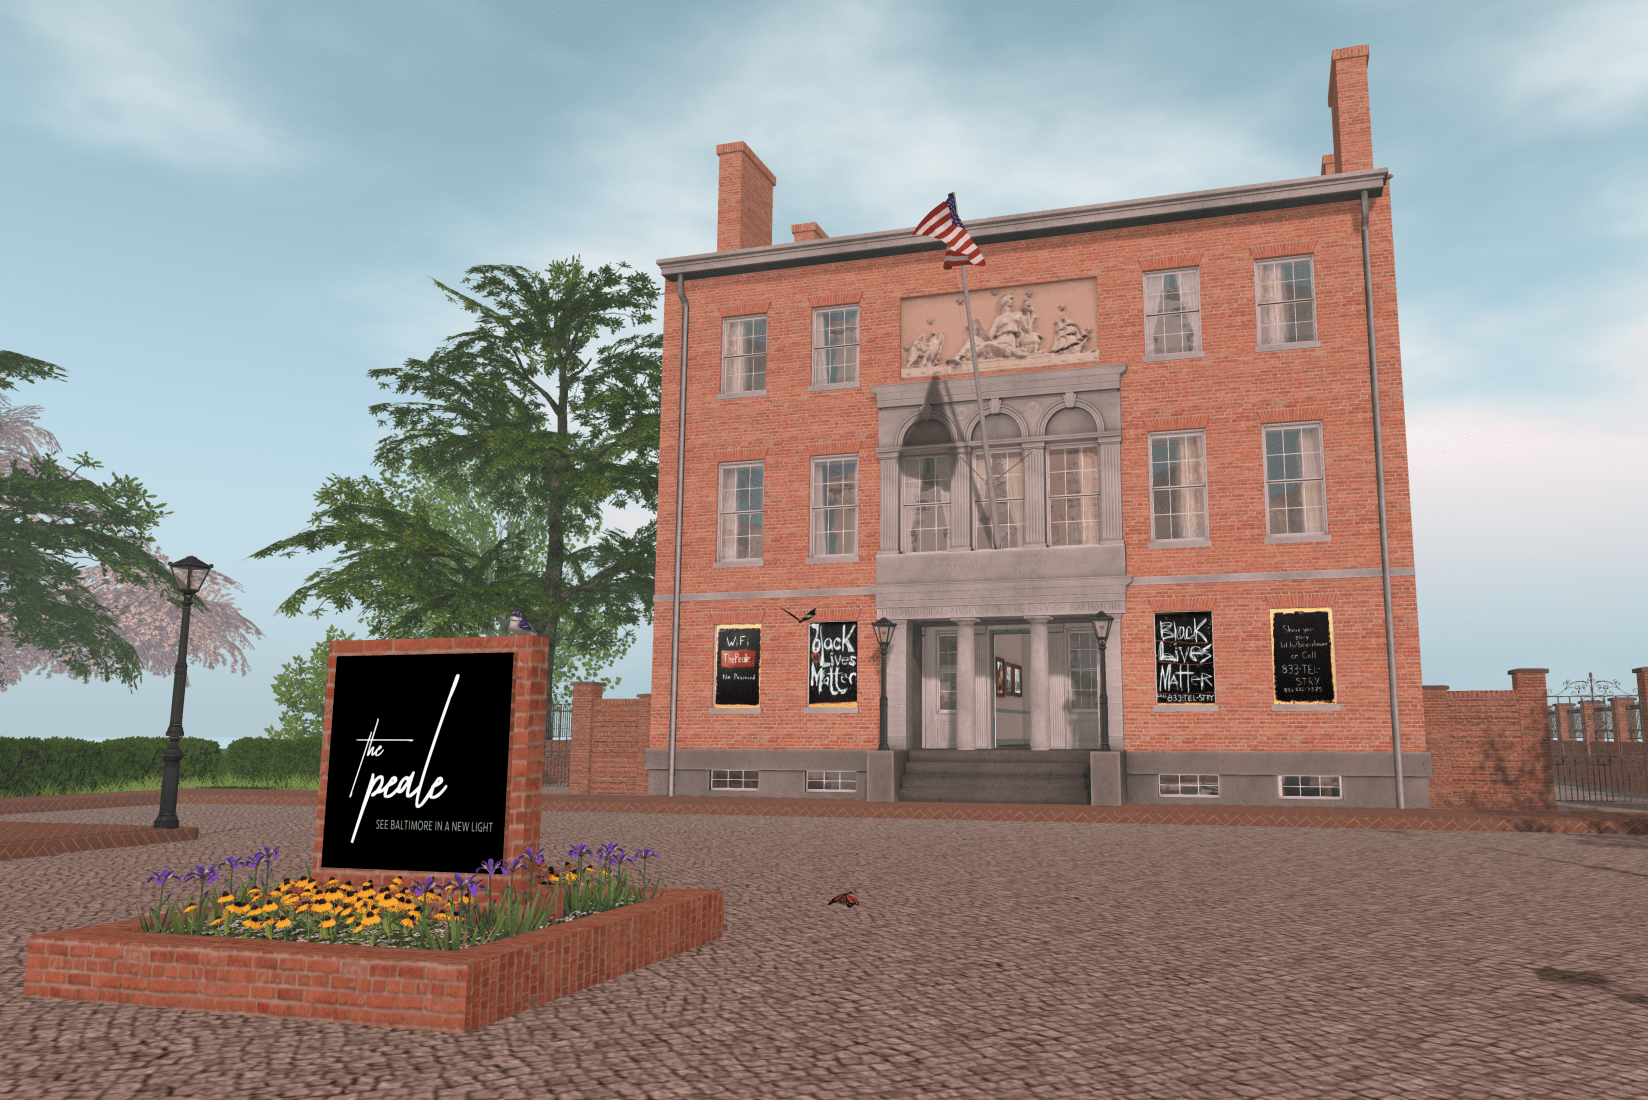 The Peale Center for Baltimore History and Architecture, which originally opened in 1814, has been rebuilt in virtual world Second Life.